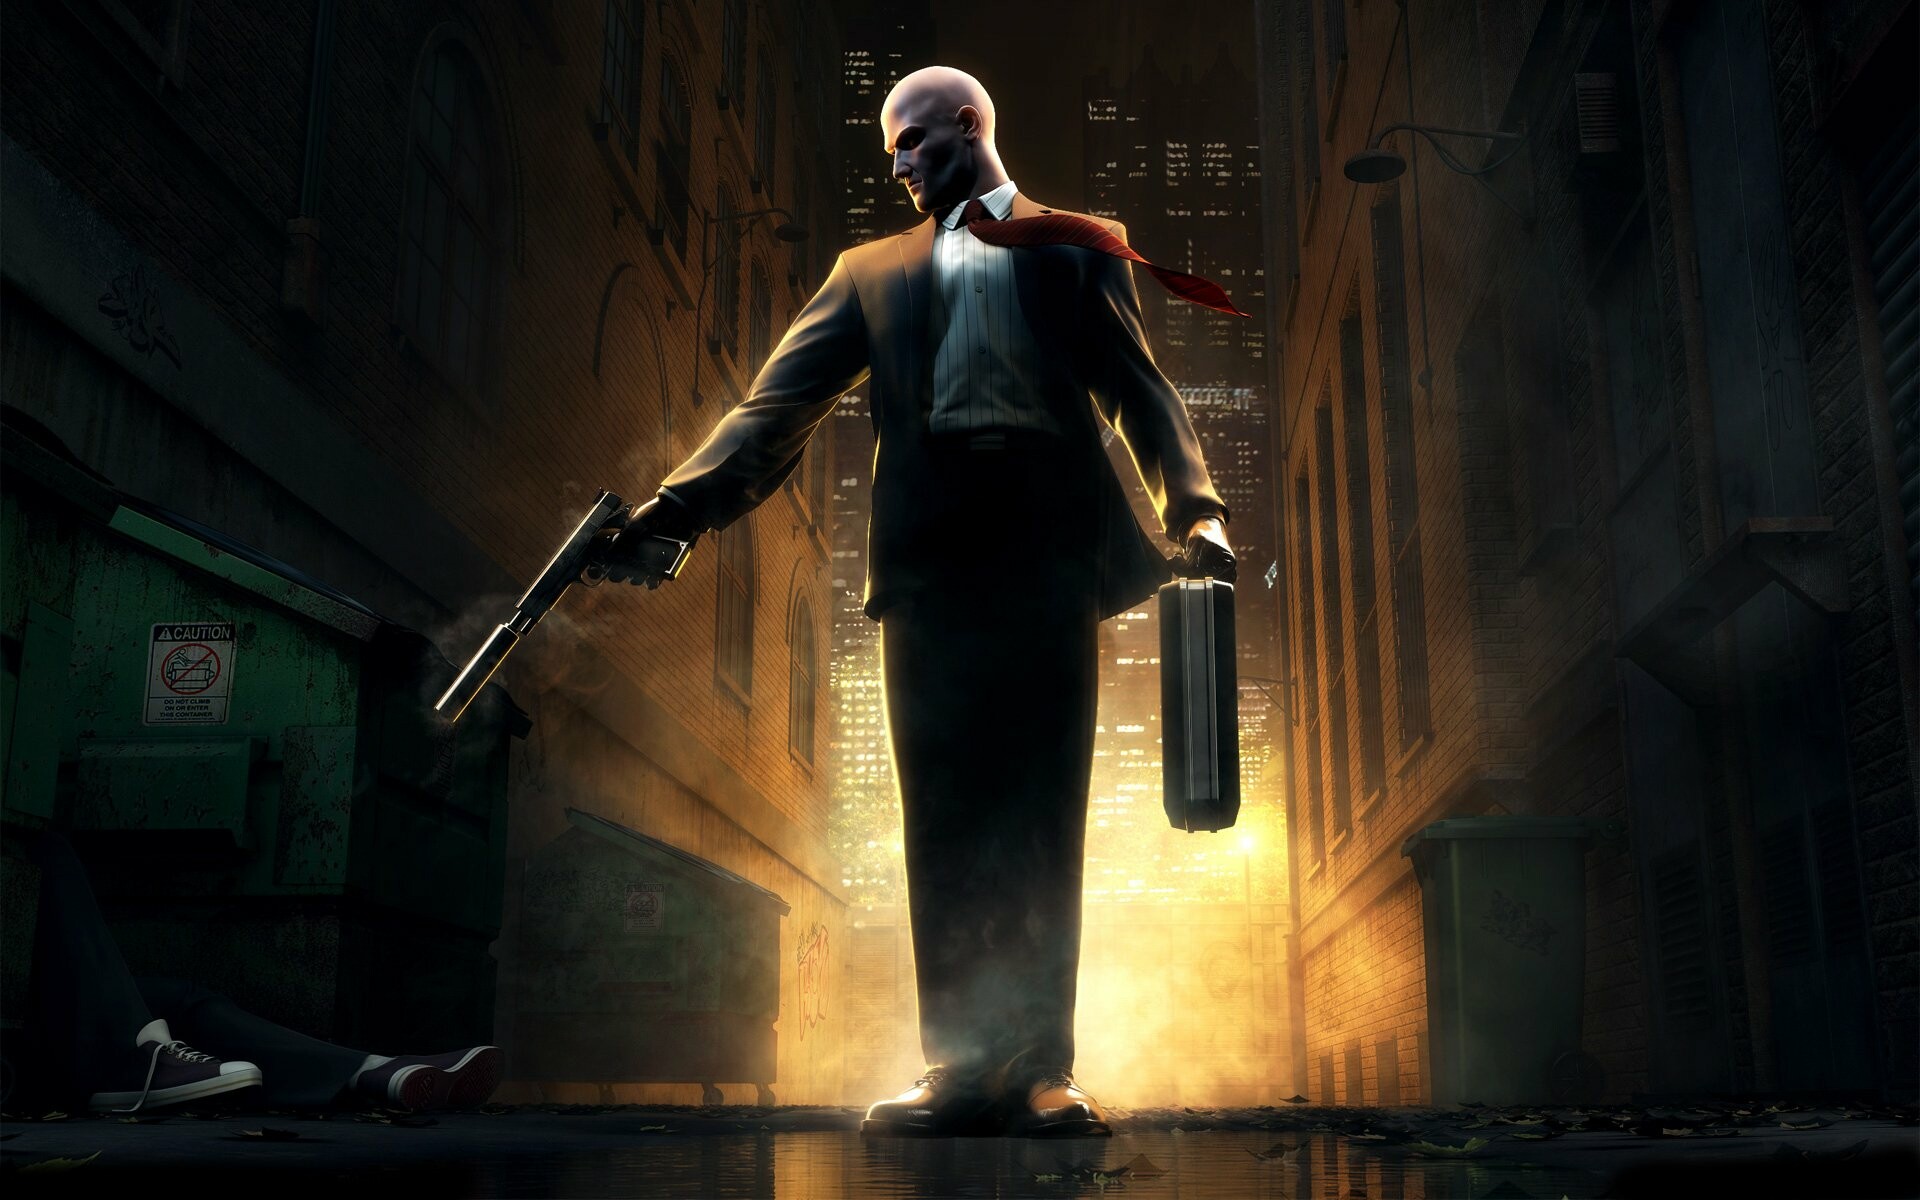 Hitman (Game): Blood Money, Agent 47, Assigned various targets to assassinate in order to complete missions. 1920x1200 HD Wallpaper.